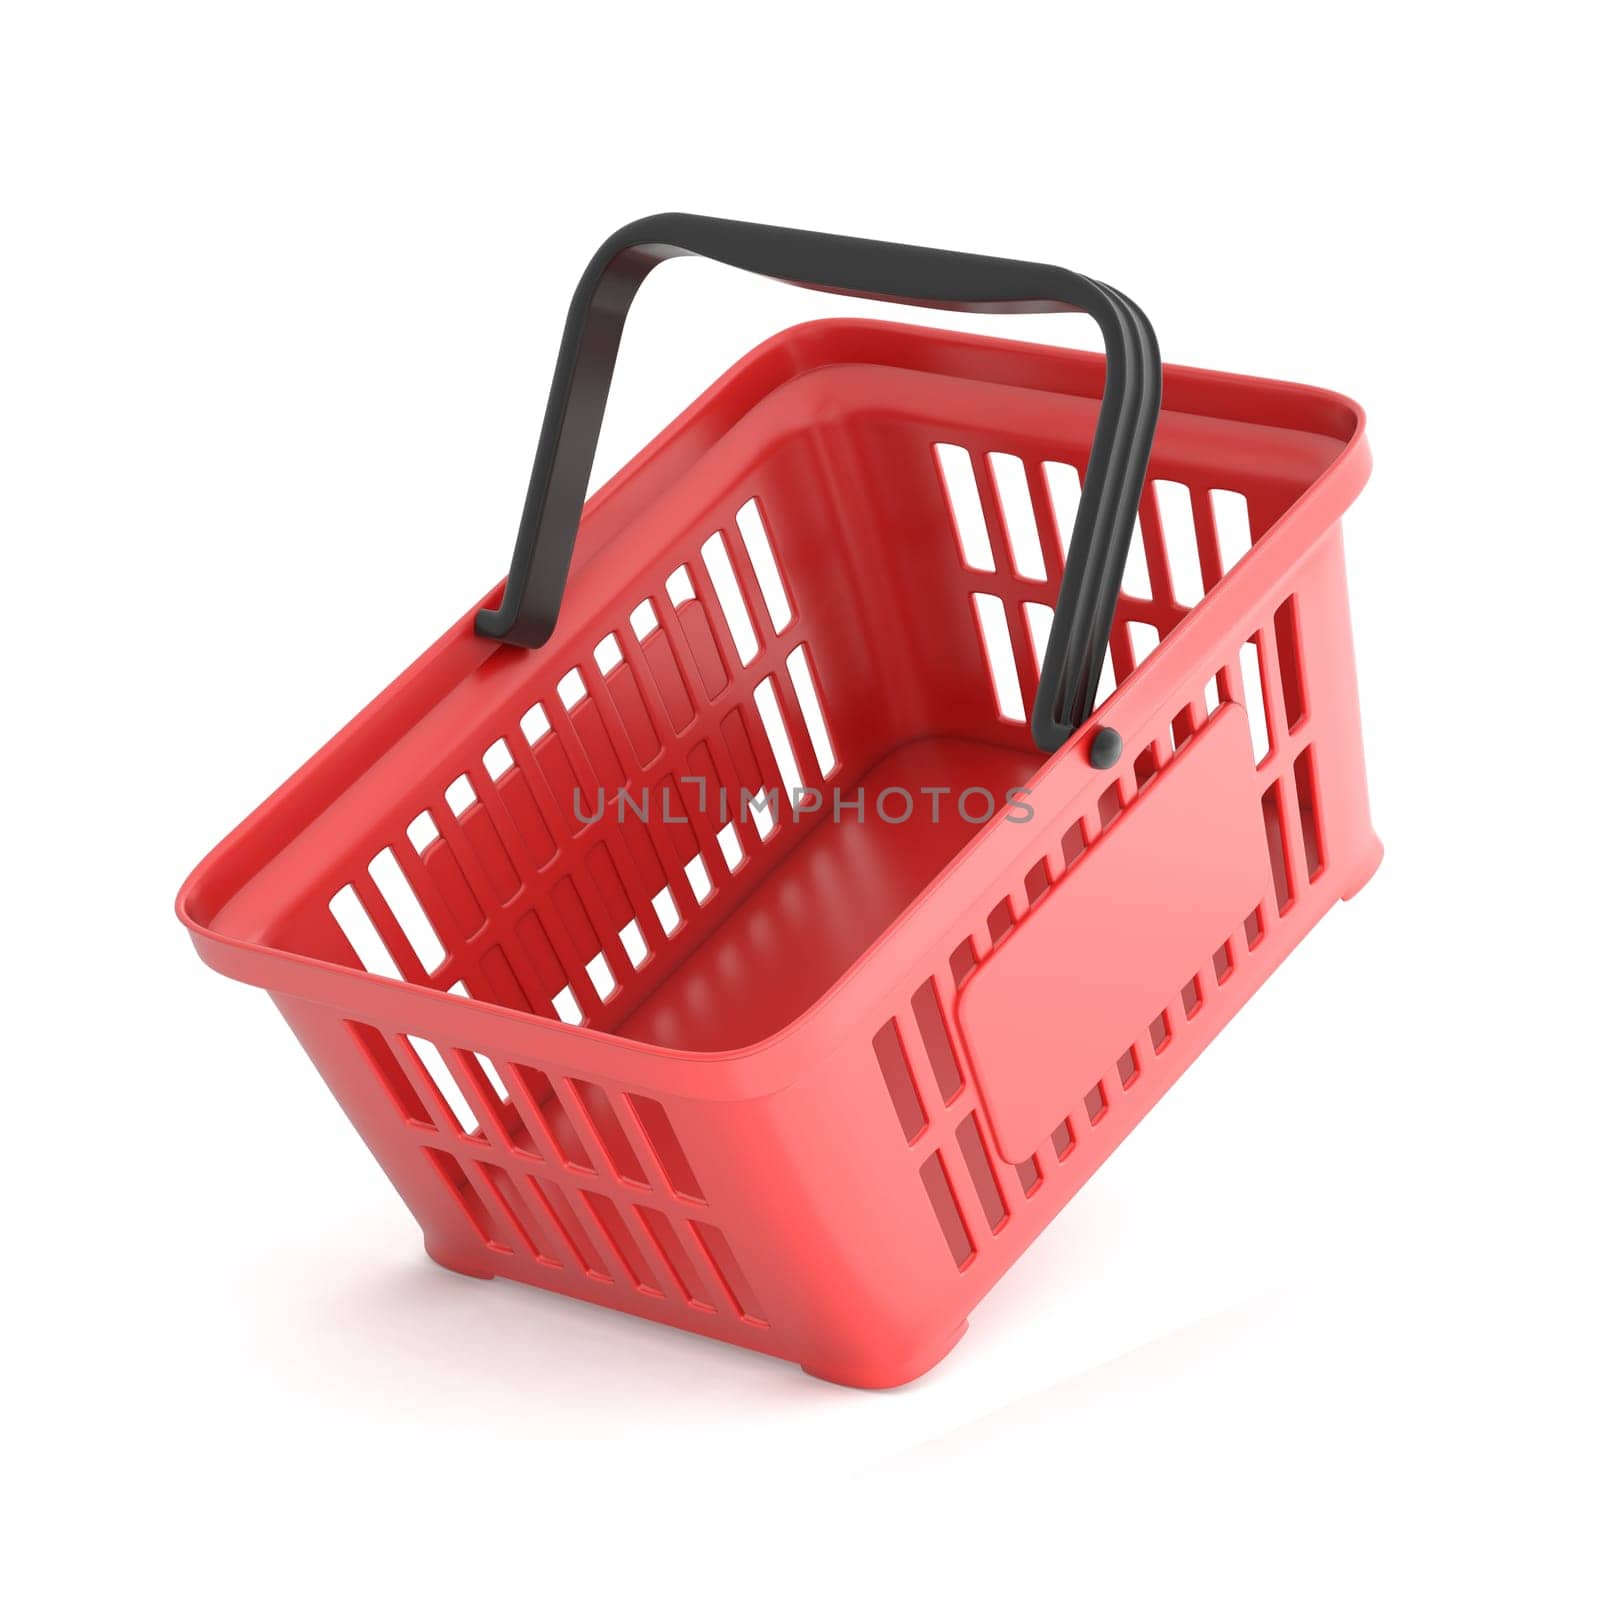 Red plastic shopping basket angled 3D rendering illustration isolated on white background